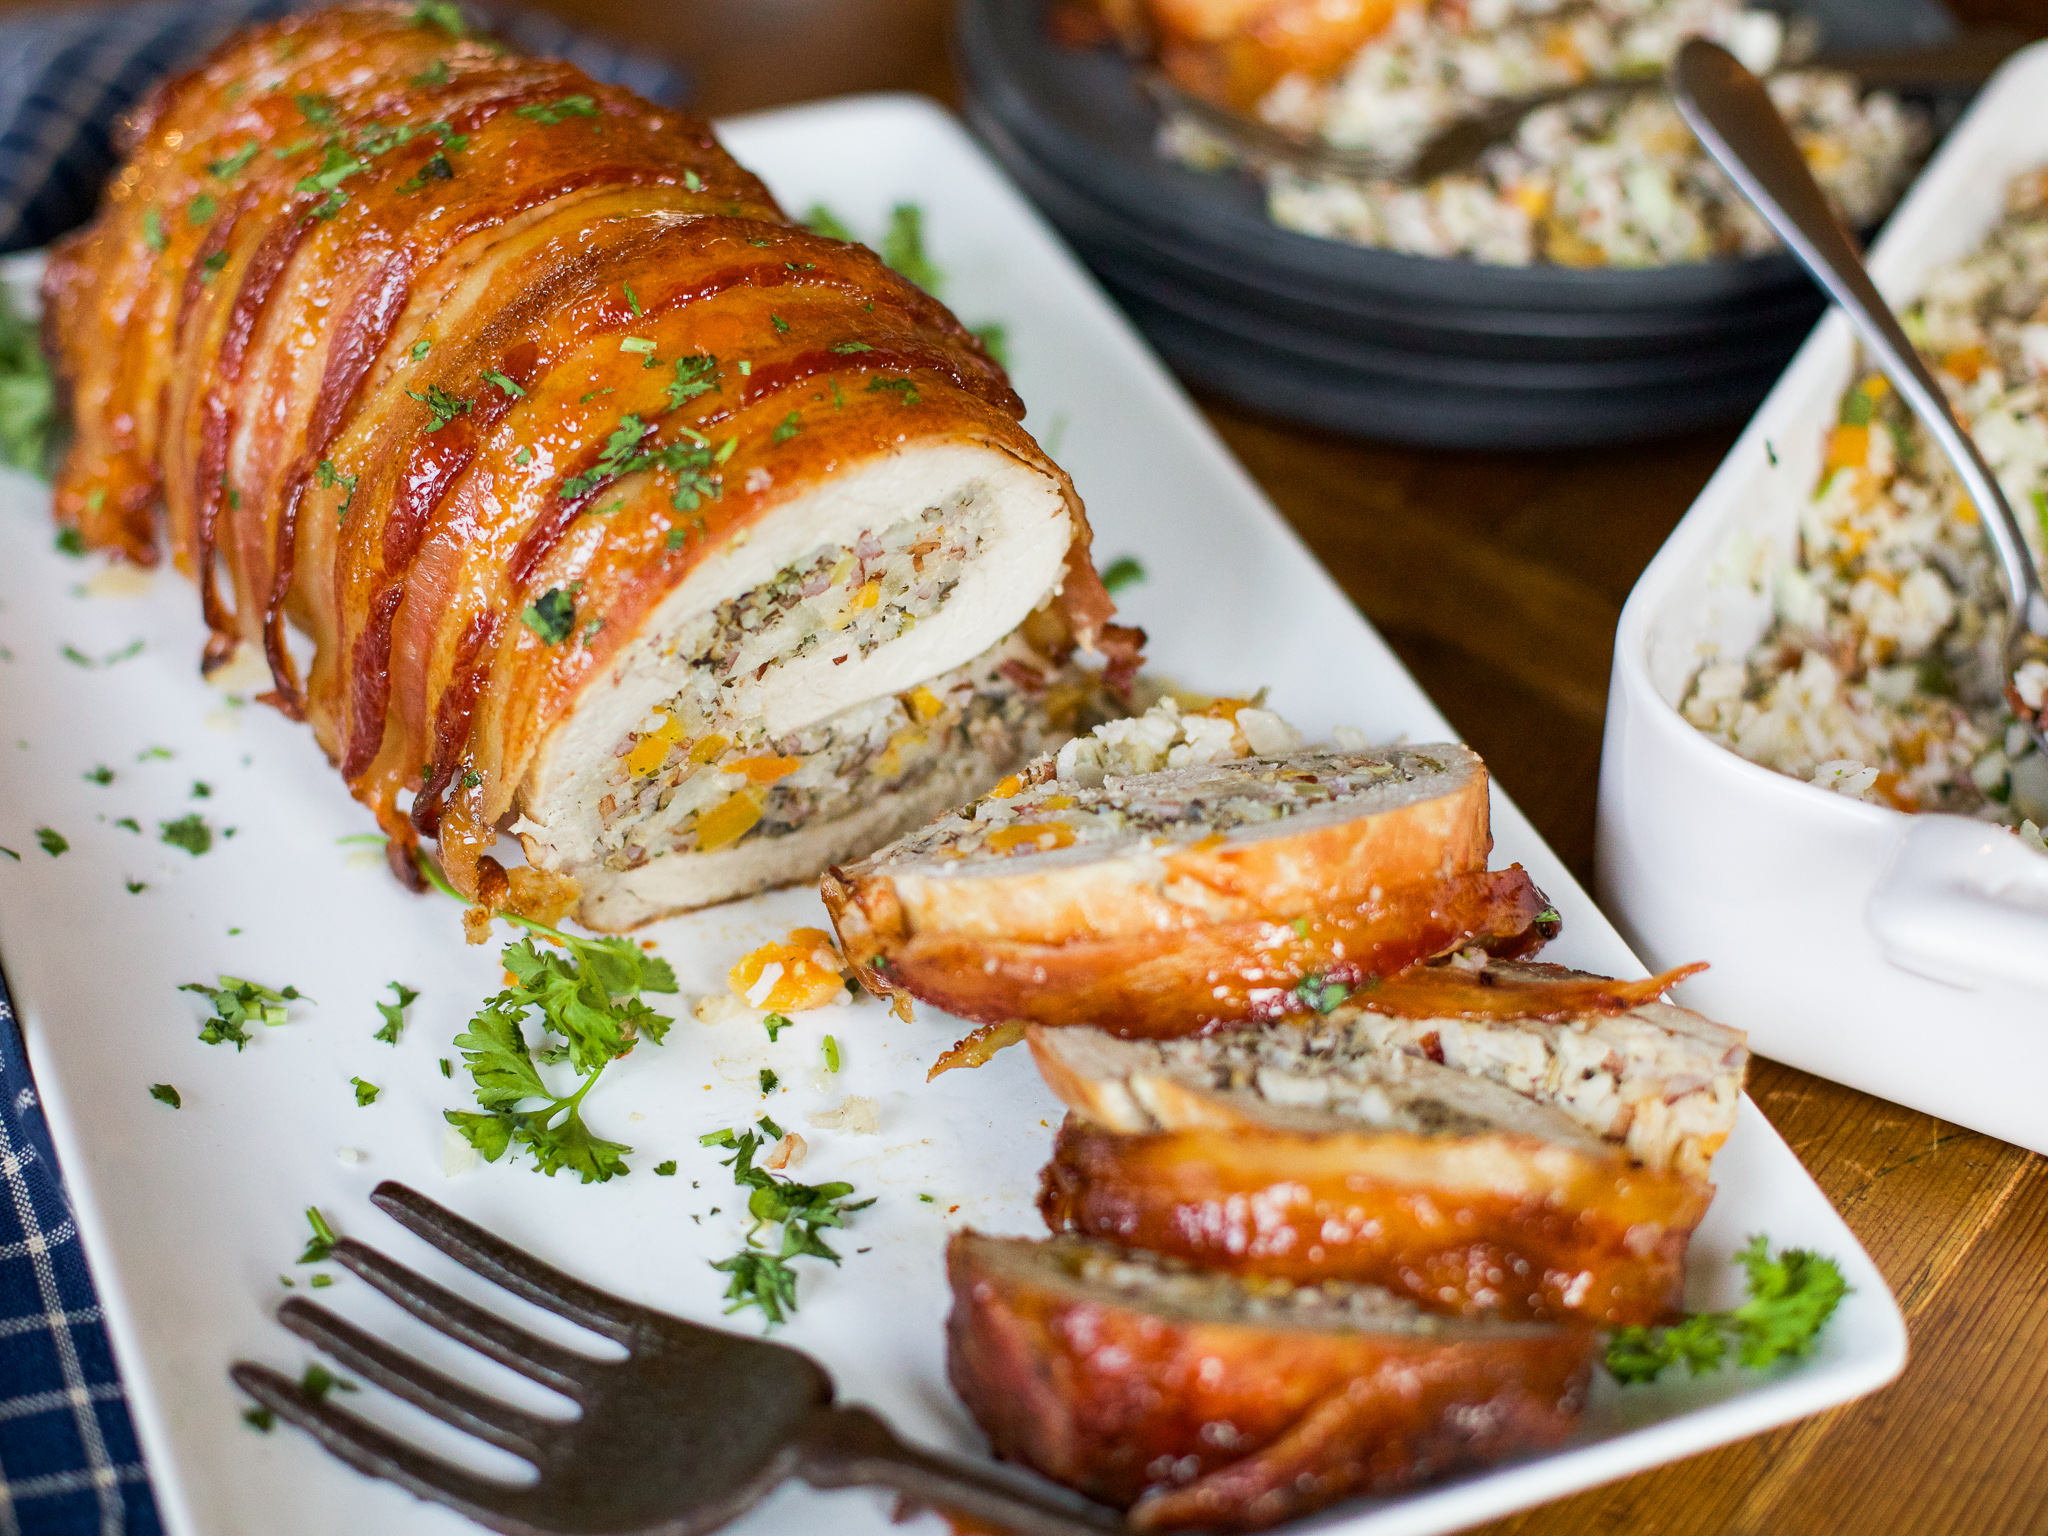 Bacon Wrapped Royal Stuffed Pork Loin Made With RiceSelect® Products - Save At Publix on I Heart Publix 2